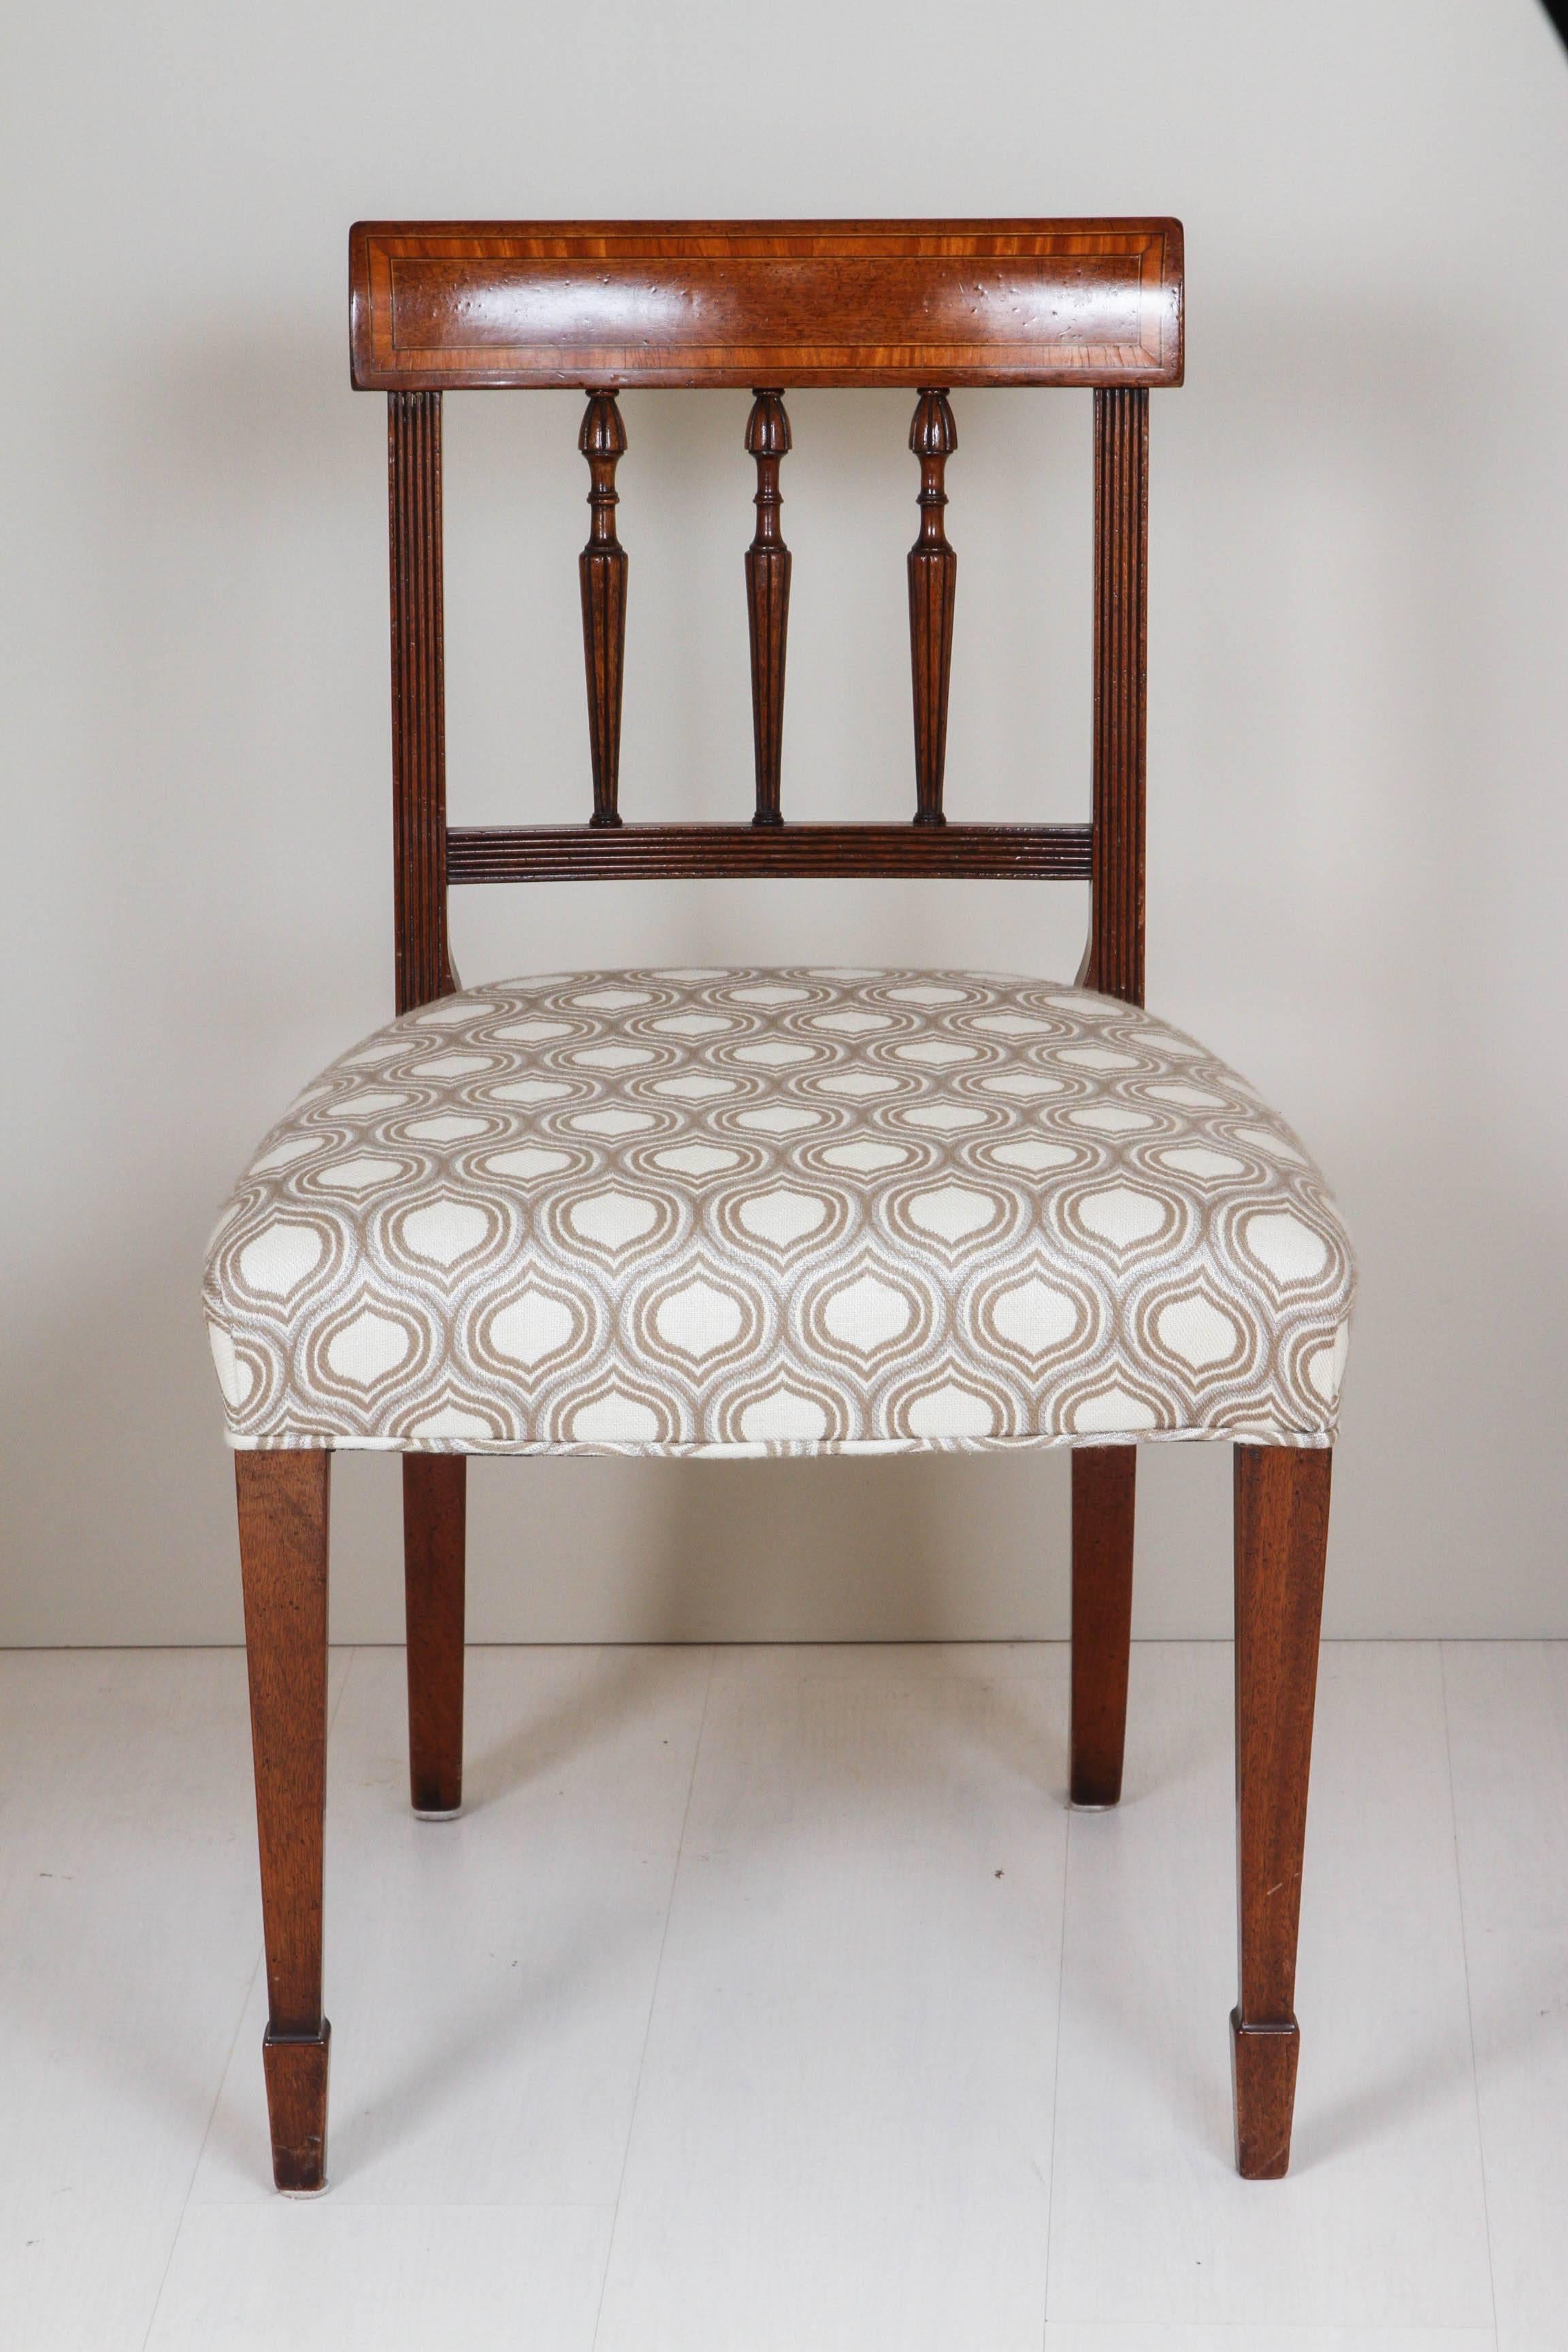 Set of six wooden chairs with re-upholstered seating.